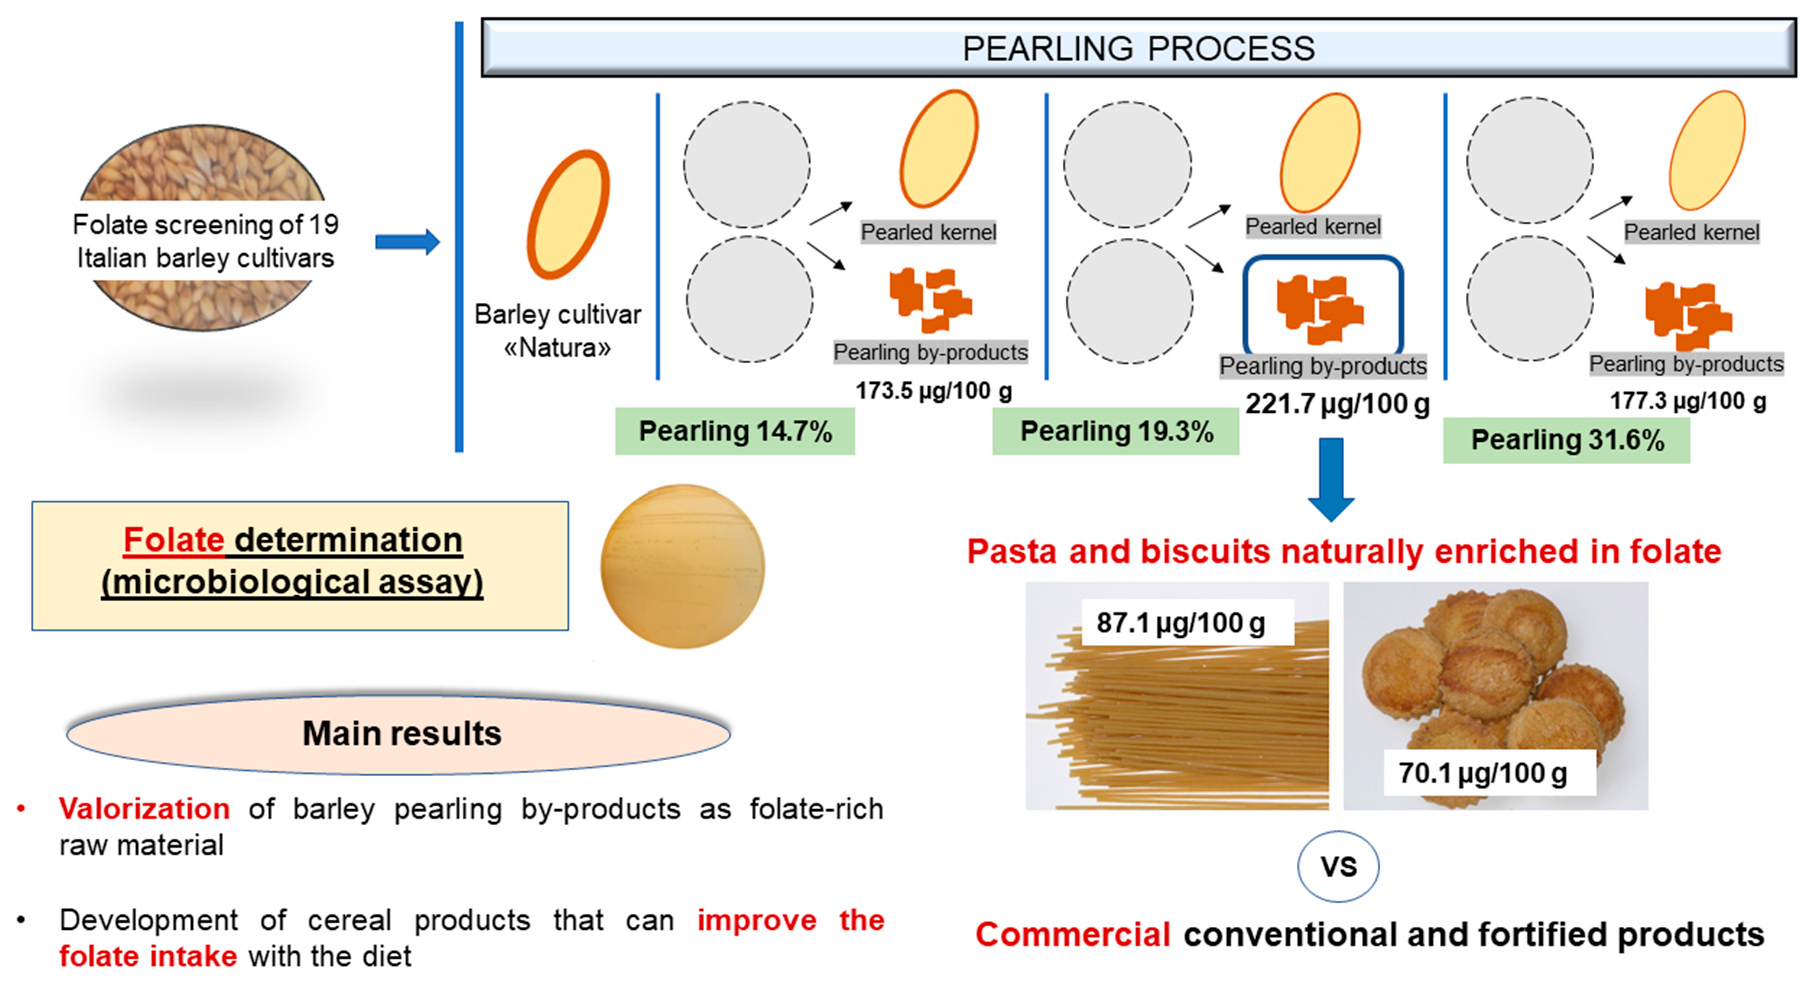 Nutrients | Free Full-Text | Design of Cereal Products Naturally Enriched  in Folate from Barley Pearling By-Products